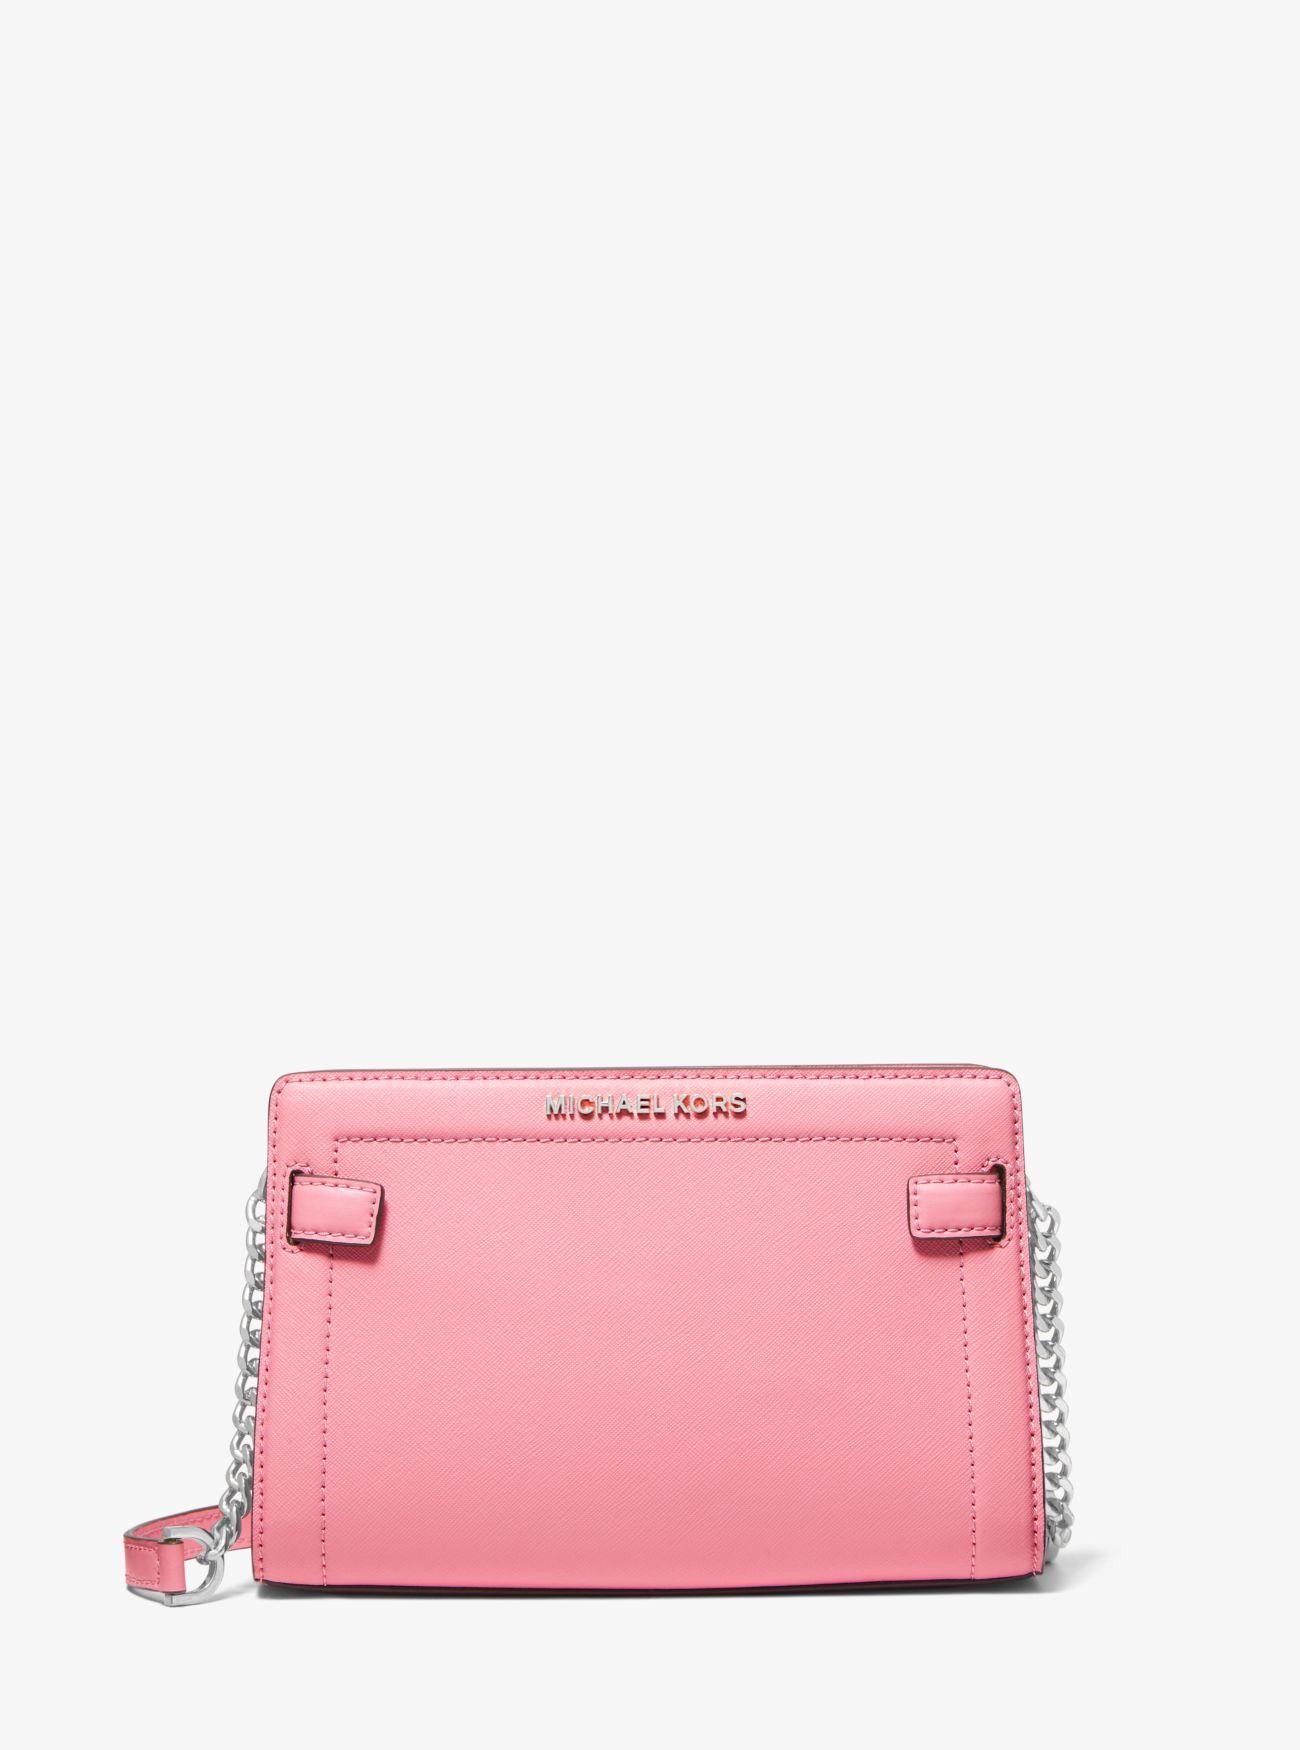 Michael Kors Rayne Small Saffiano Leather Crossbody Bag in Pink - Lyst